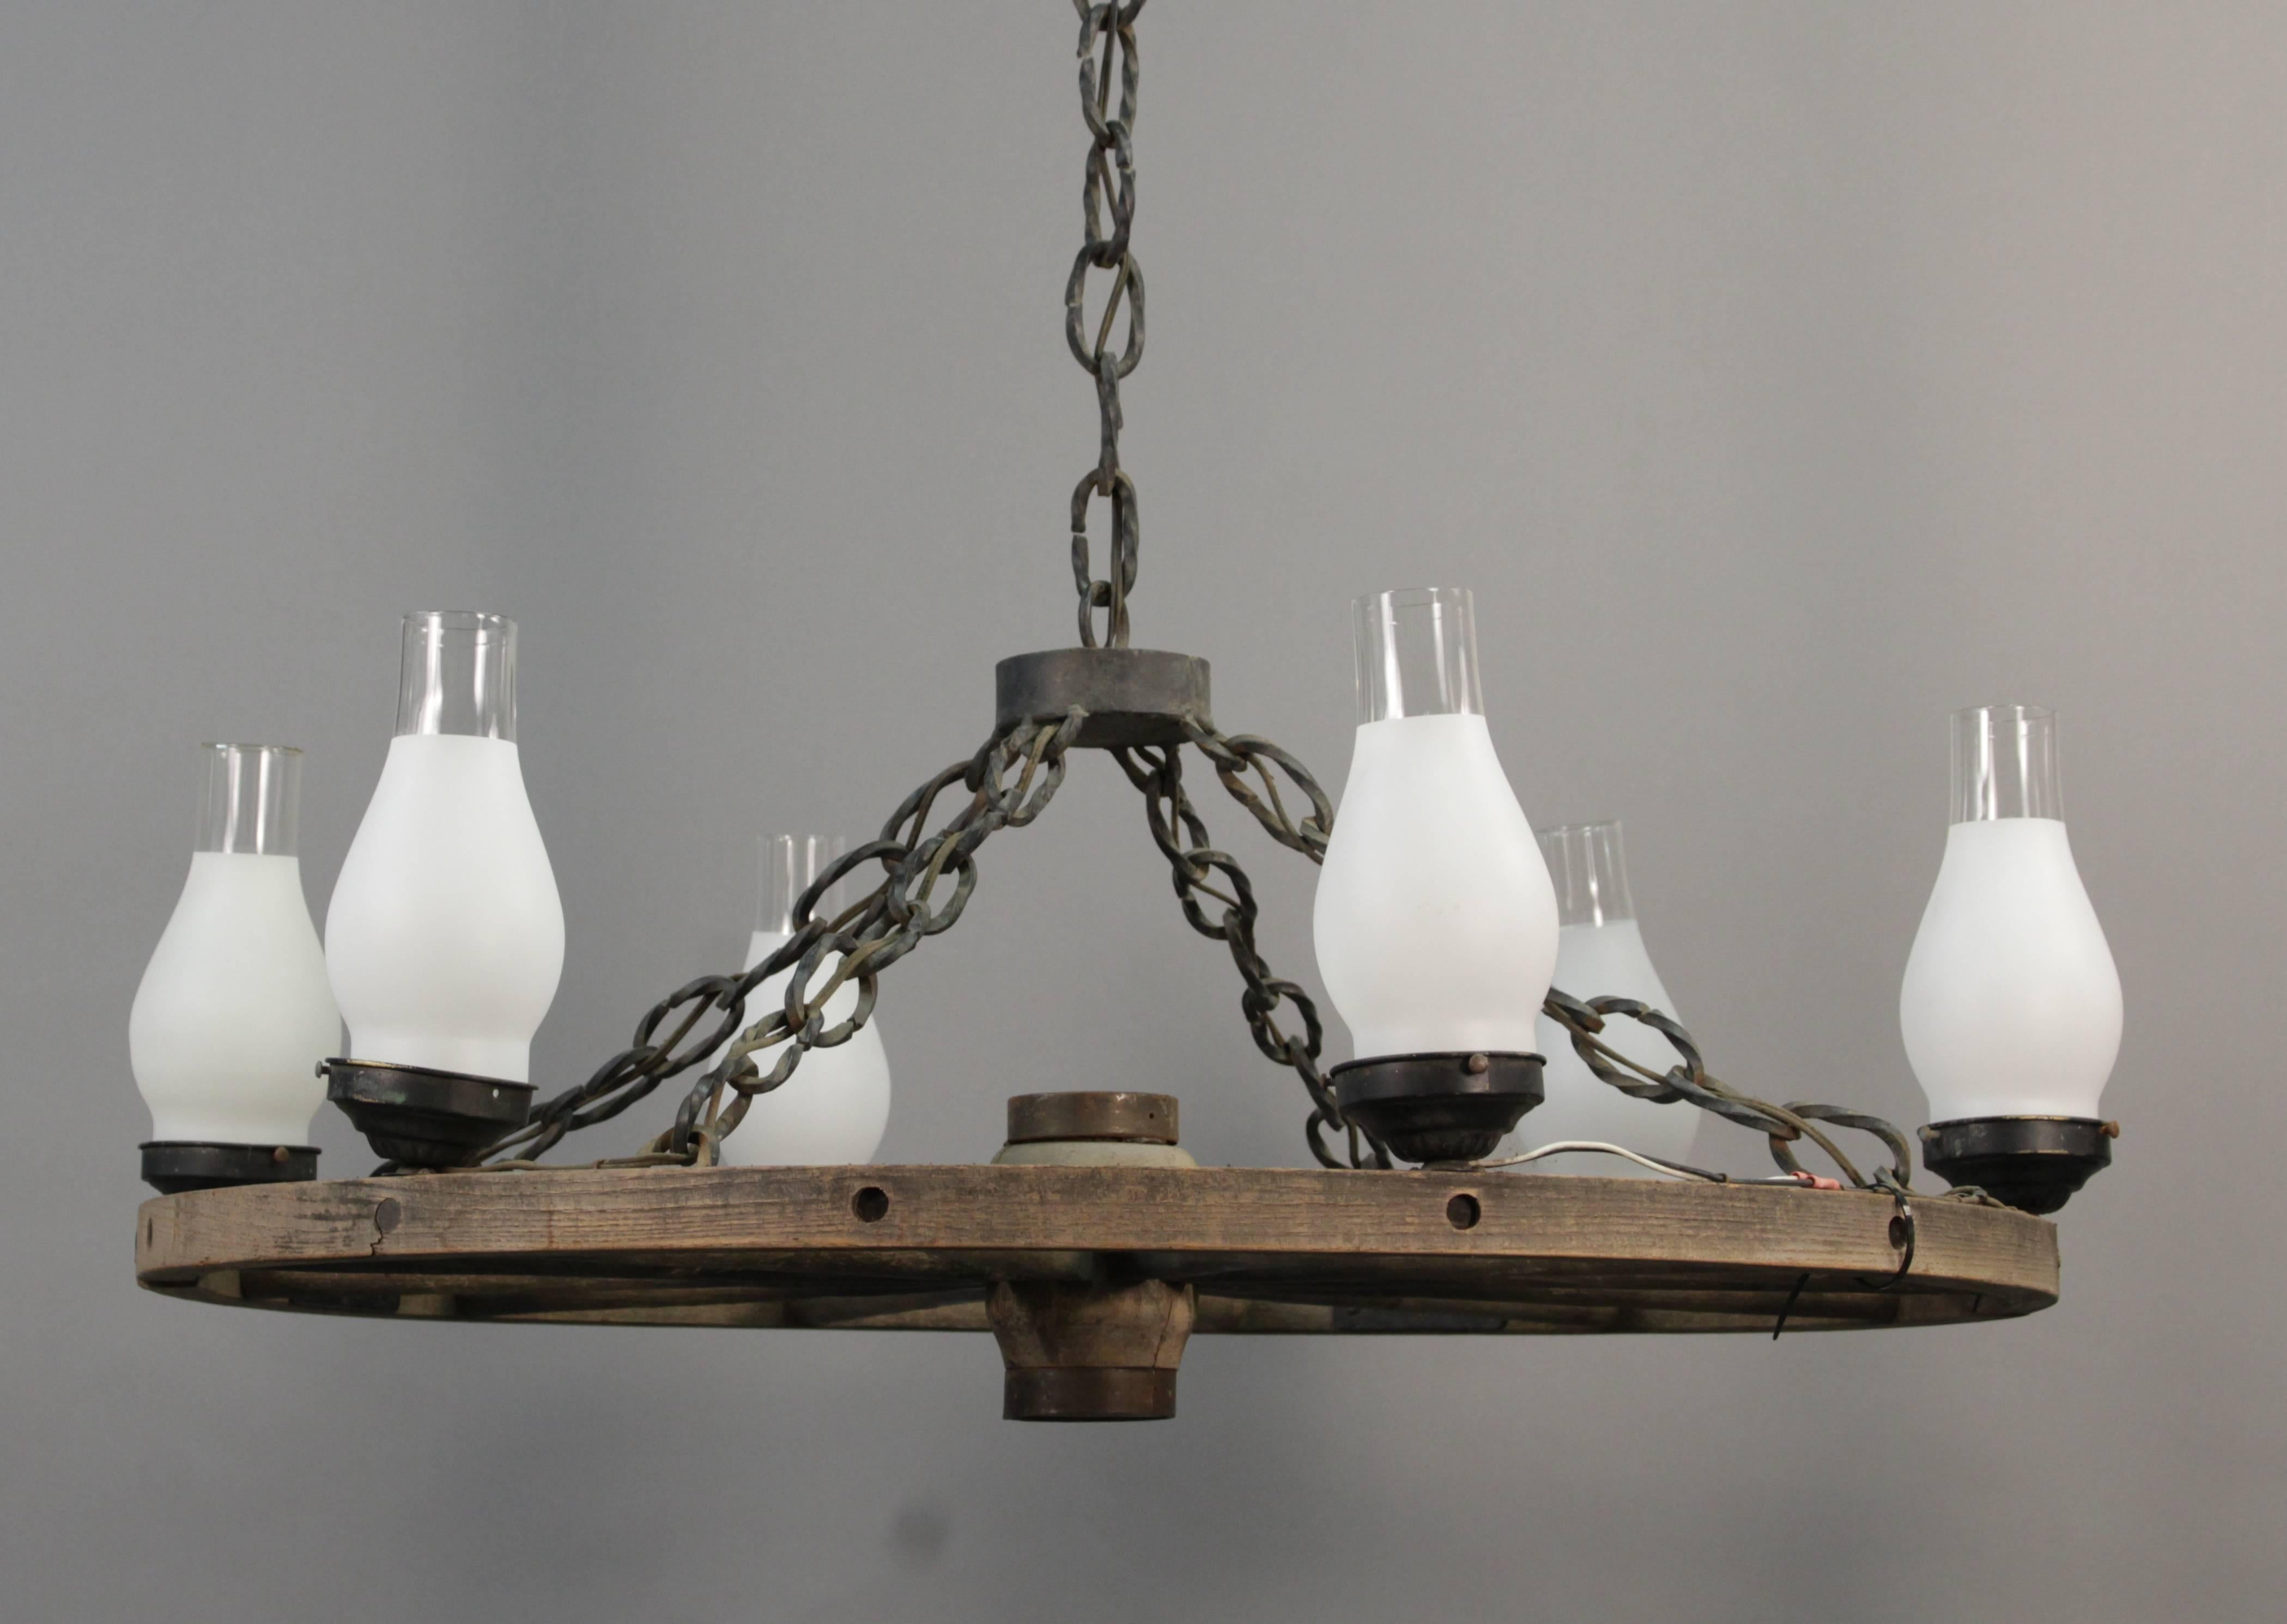 Sold and priced separately. Impressive wagon wheel chandelier with six lights.

Measures: 17